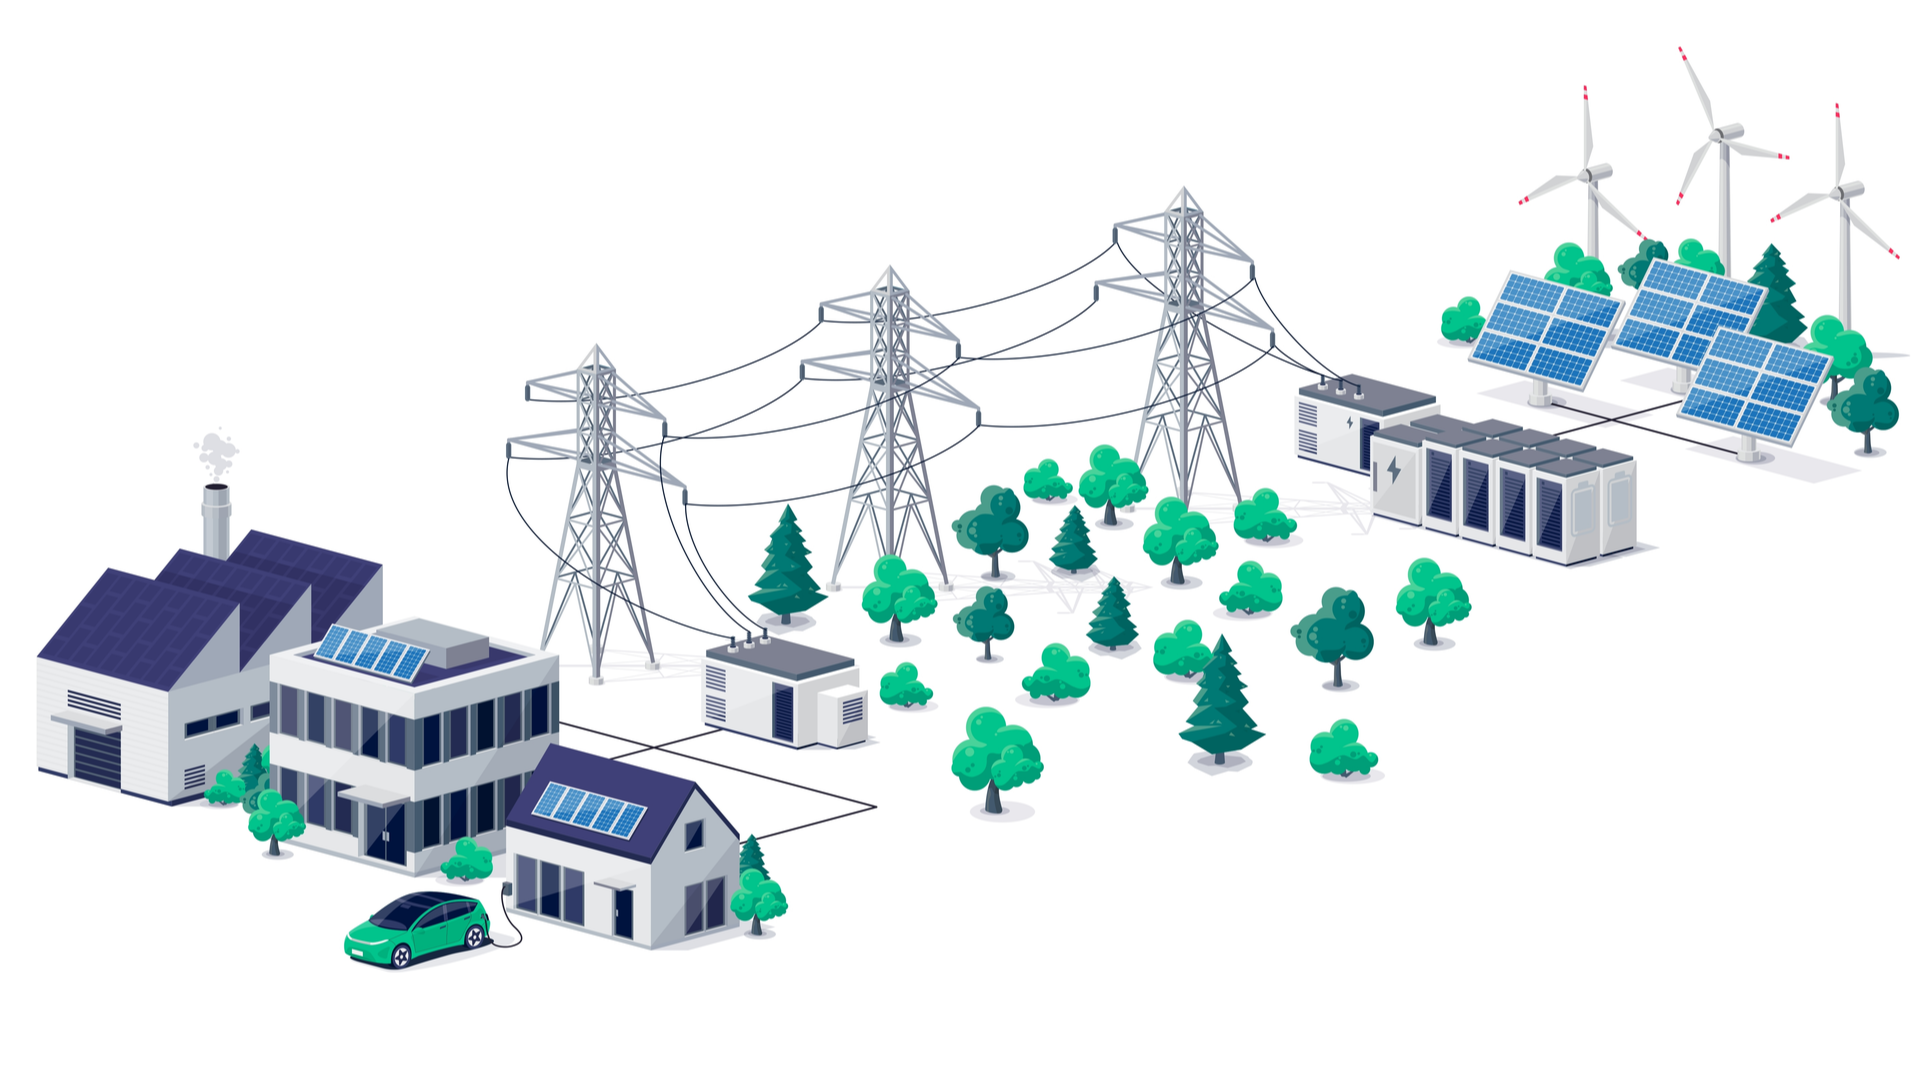 graphic showing the electric grid, homes, and EVs